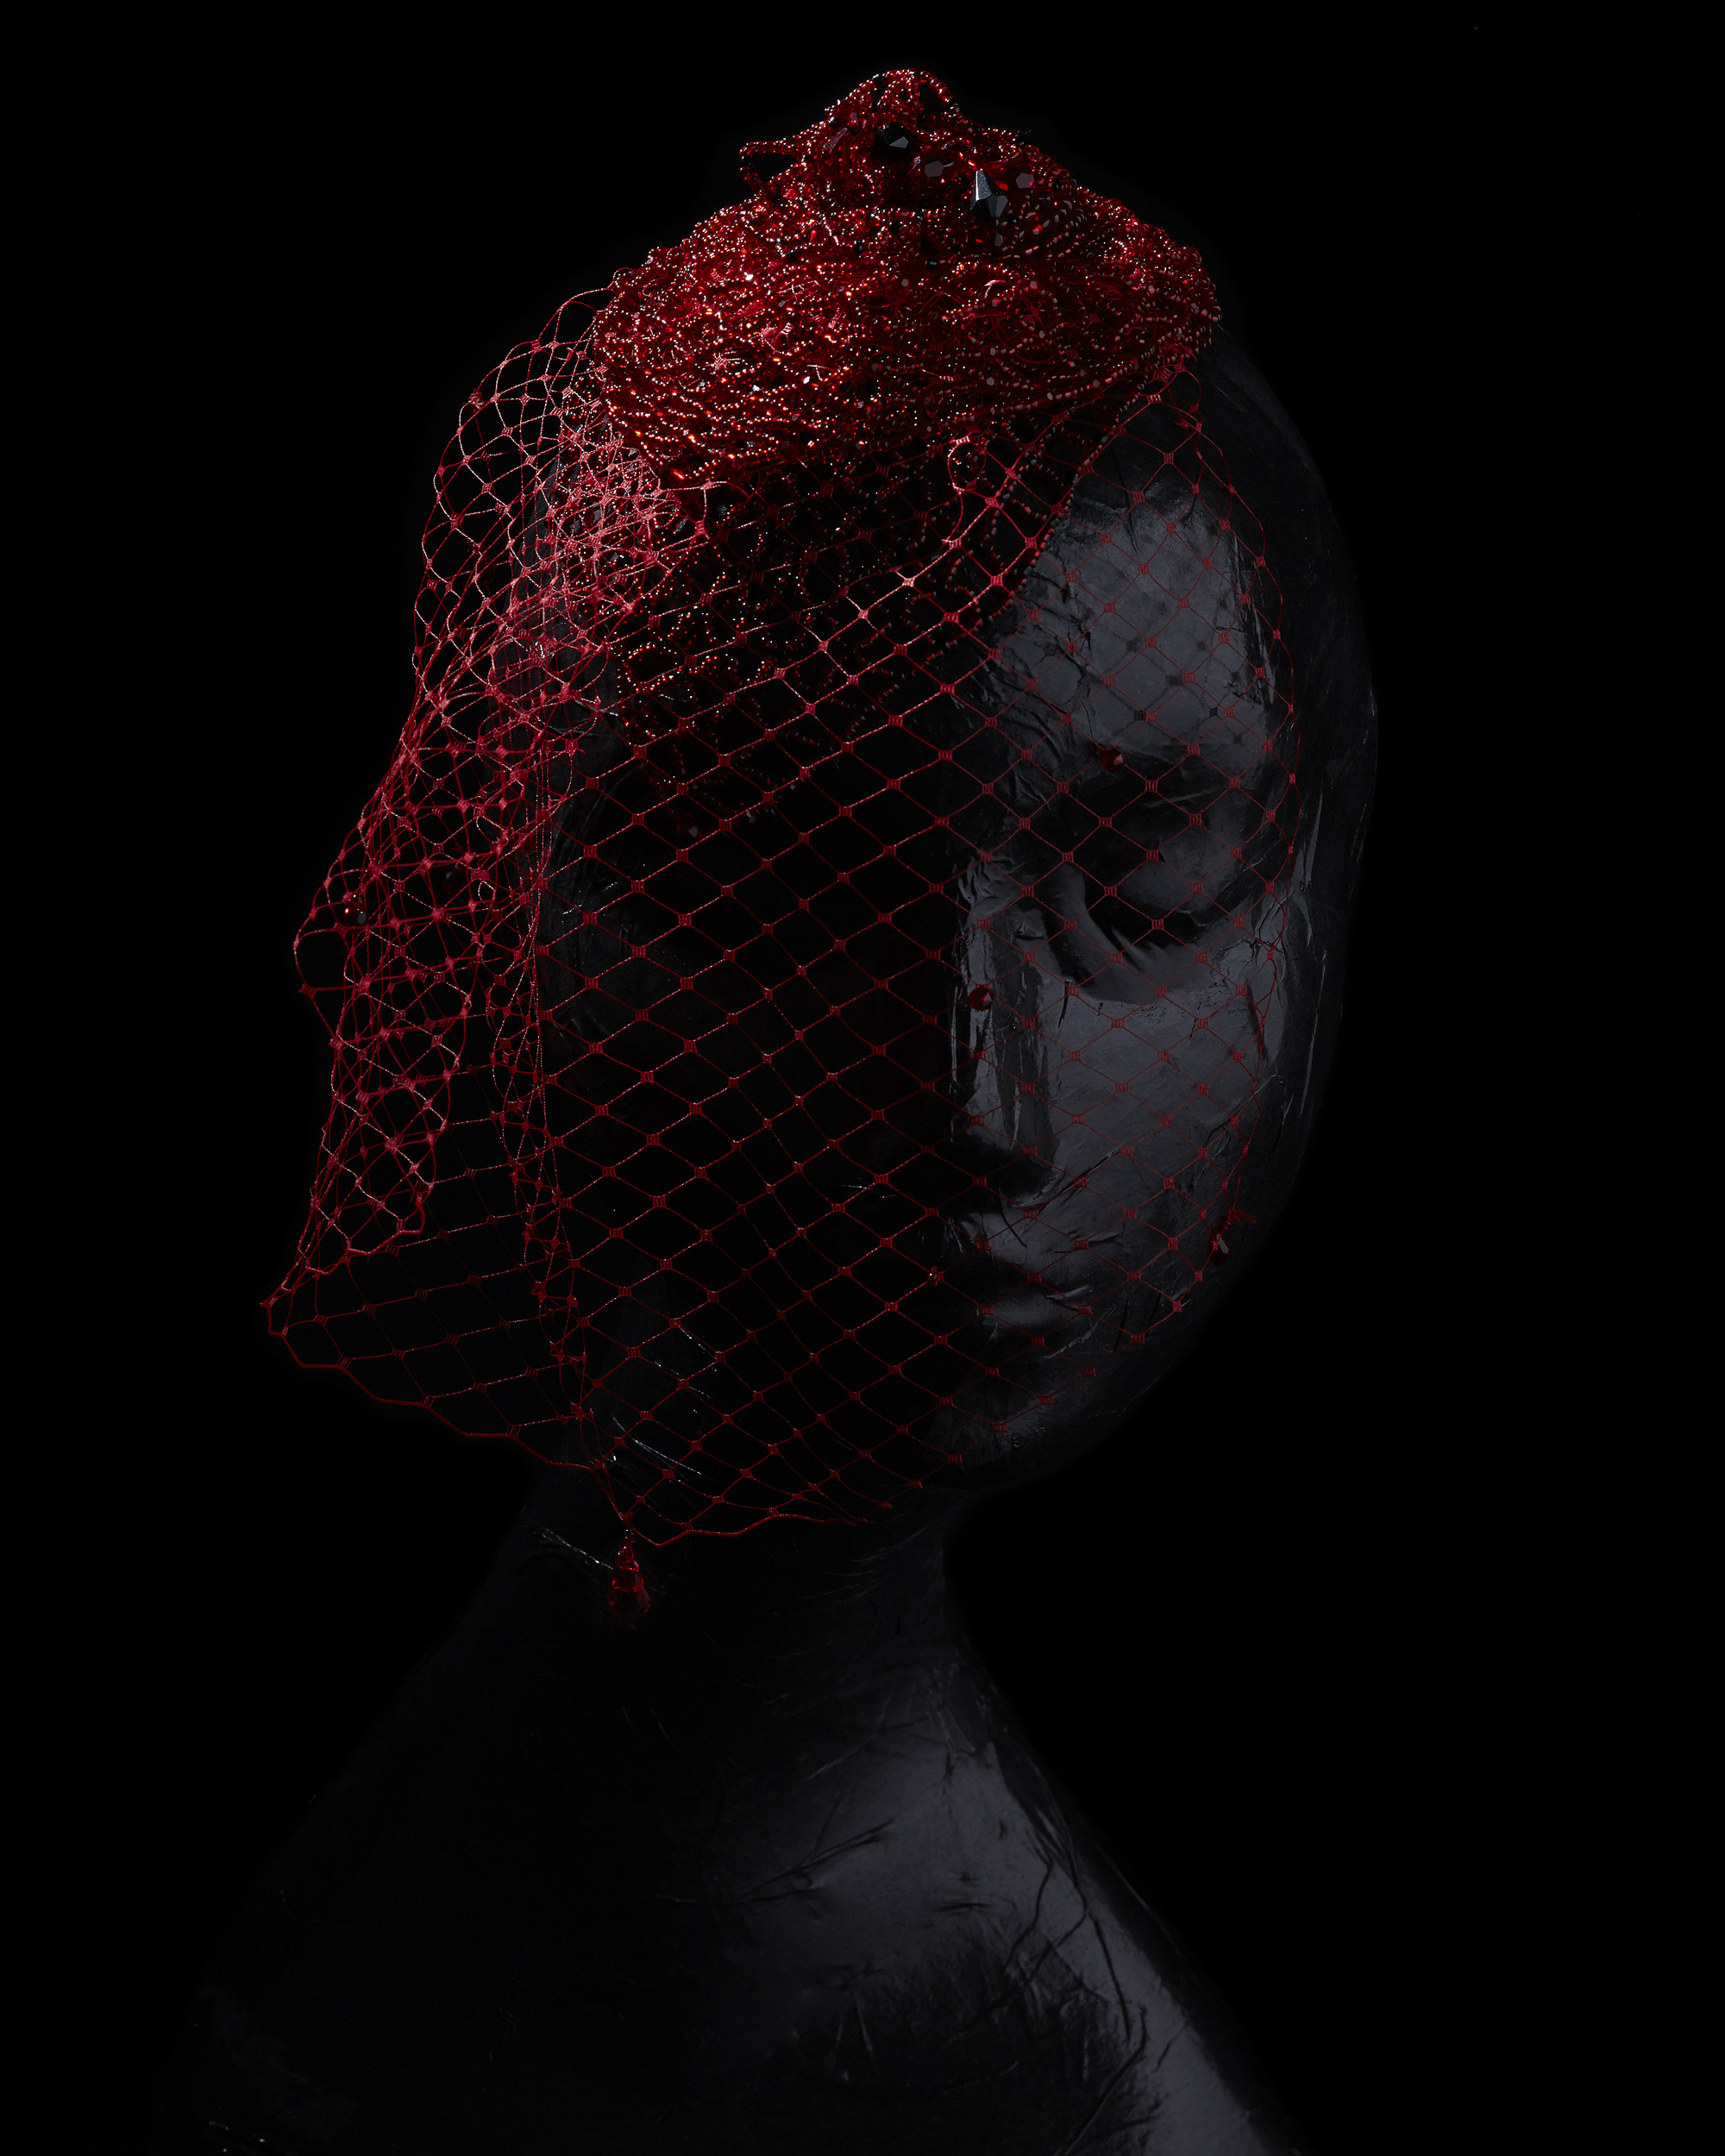 red beaded net hair piece and veil on a somber black mannequin on a black background